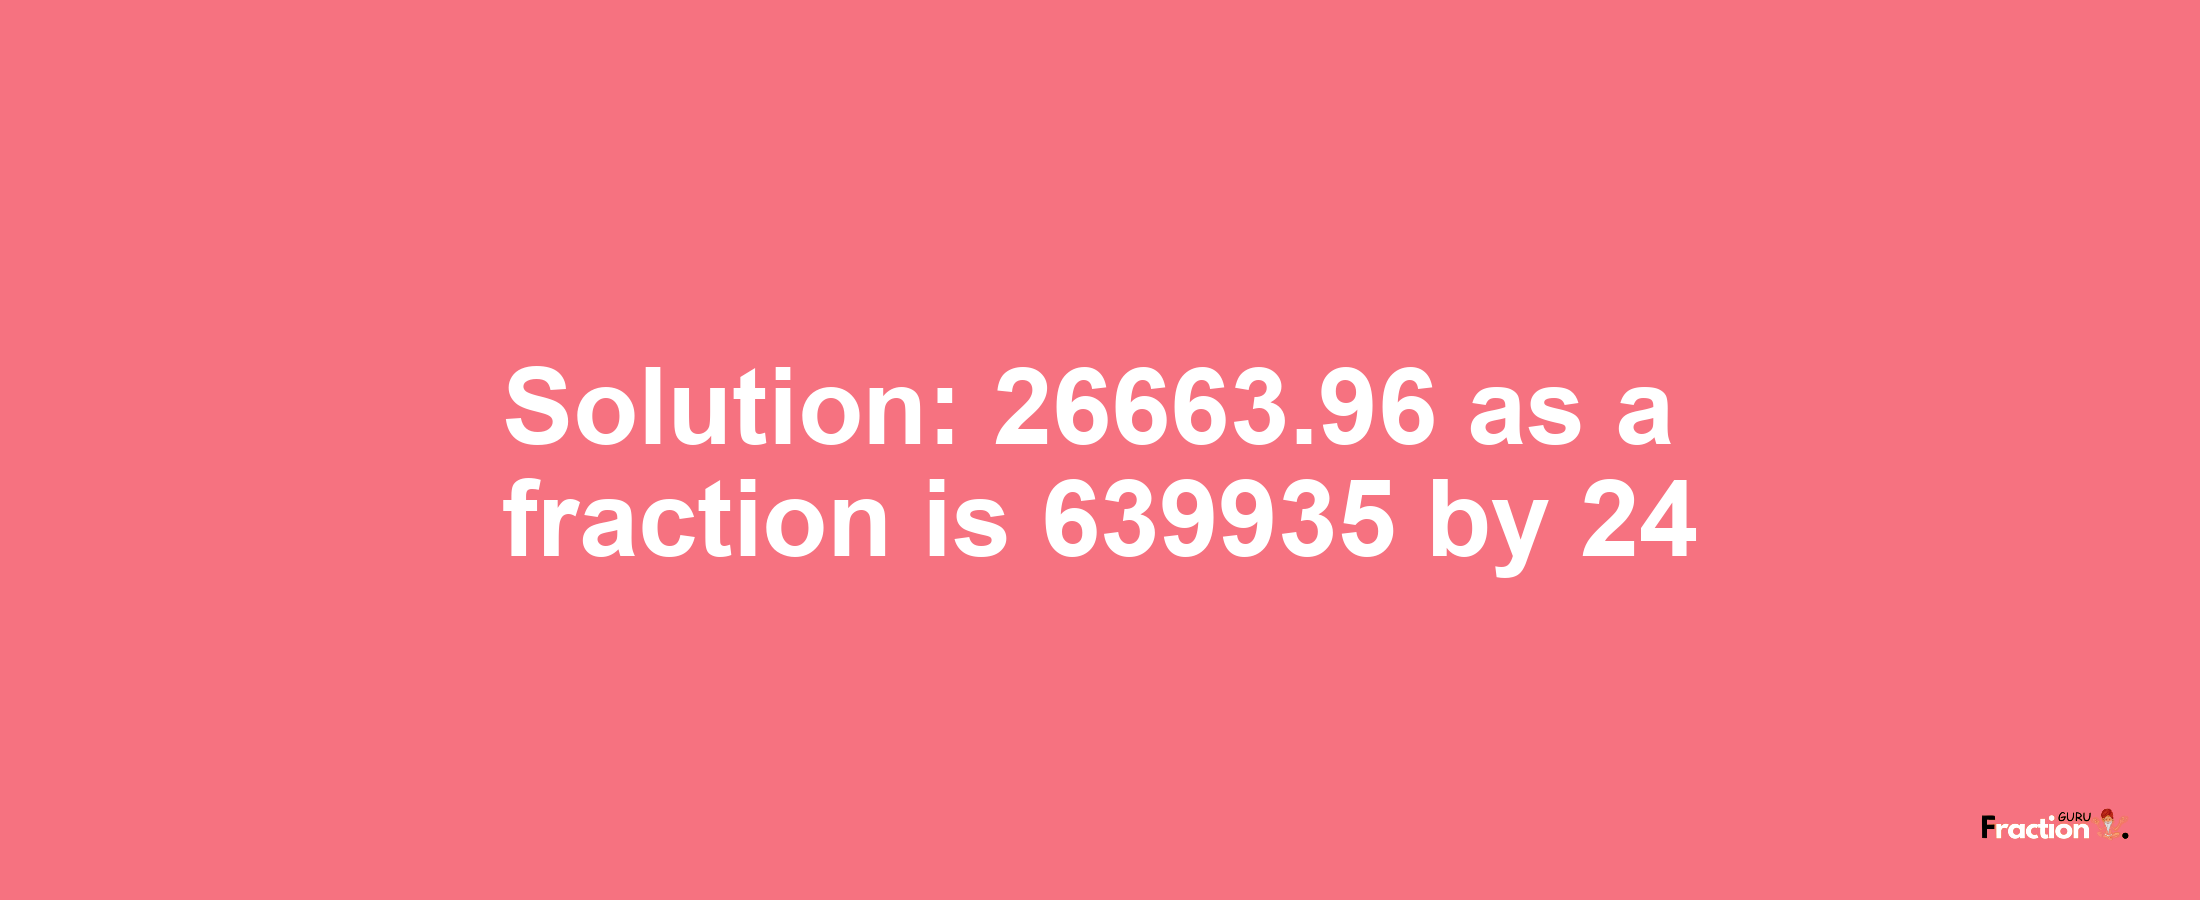 Solution:26663.96 as a fraction is 639935/24